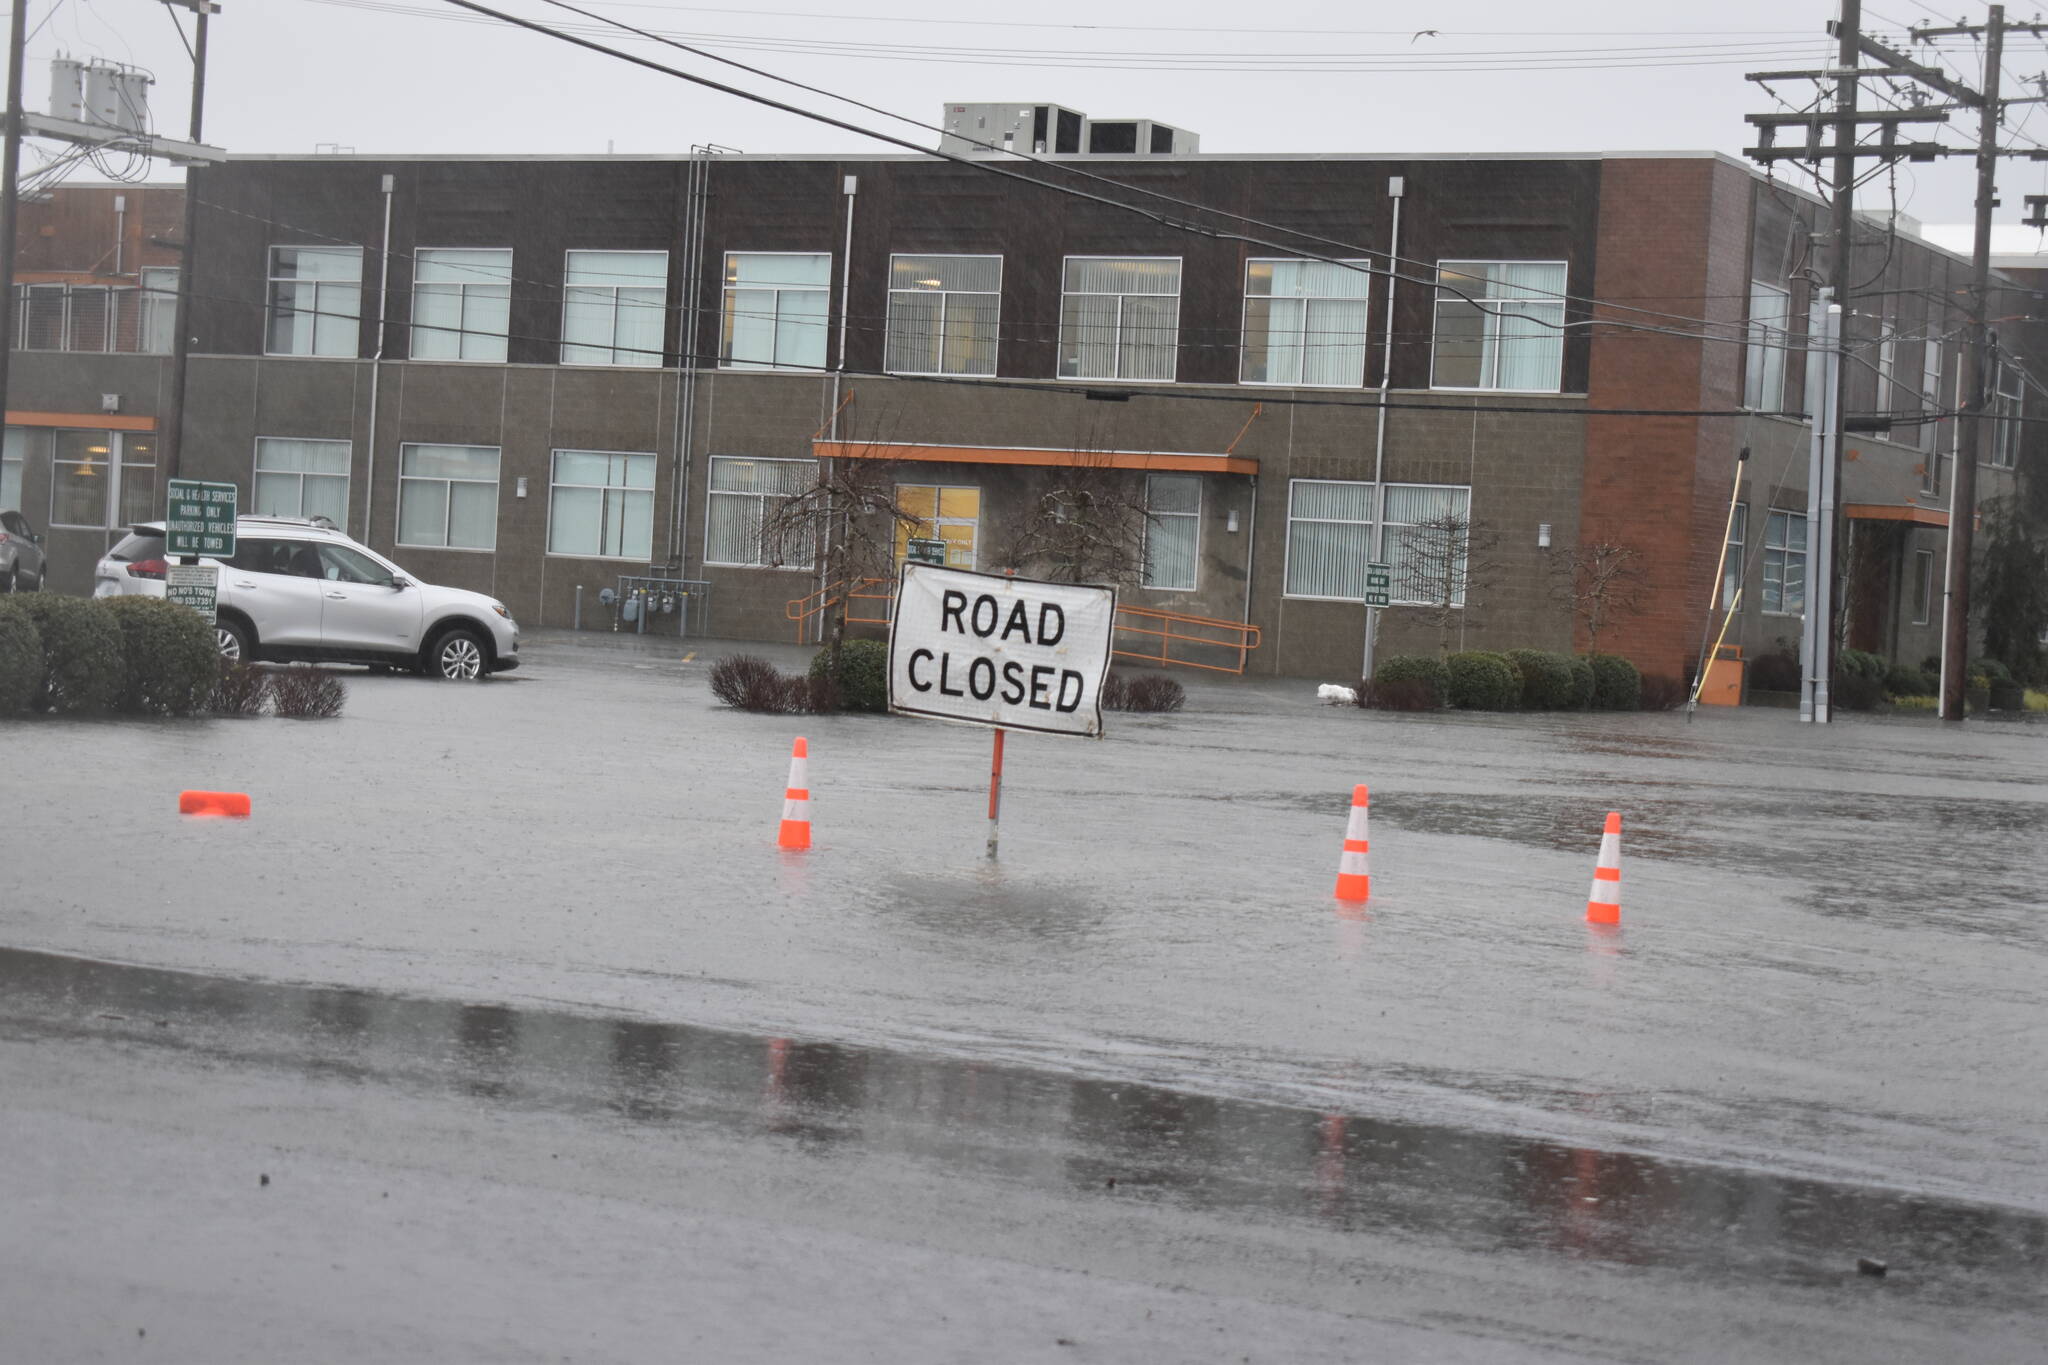 Matthew N. Wells | The Daily World
Heavy rain and a high tide hit Aberdeen on Thursday afternoon, Jan. 6, 2022. The combination shuttered South M Street in Aberdeen. Floodwaters also closed numerous other streets in Grays Harbor County.